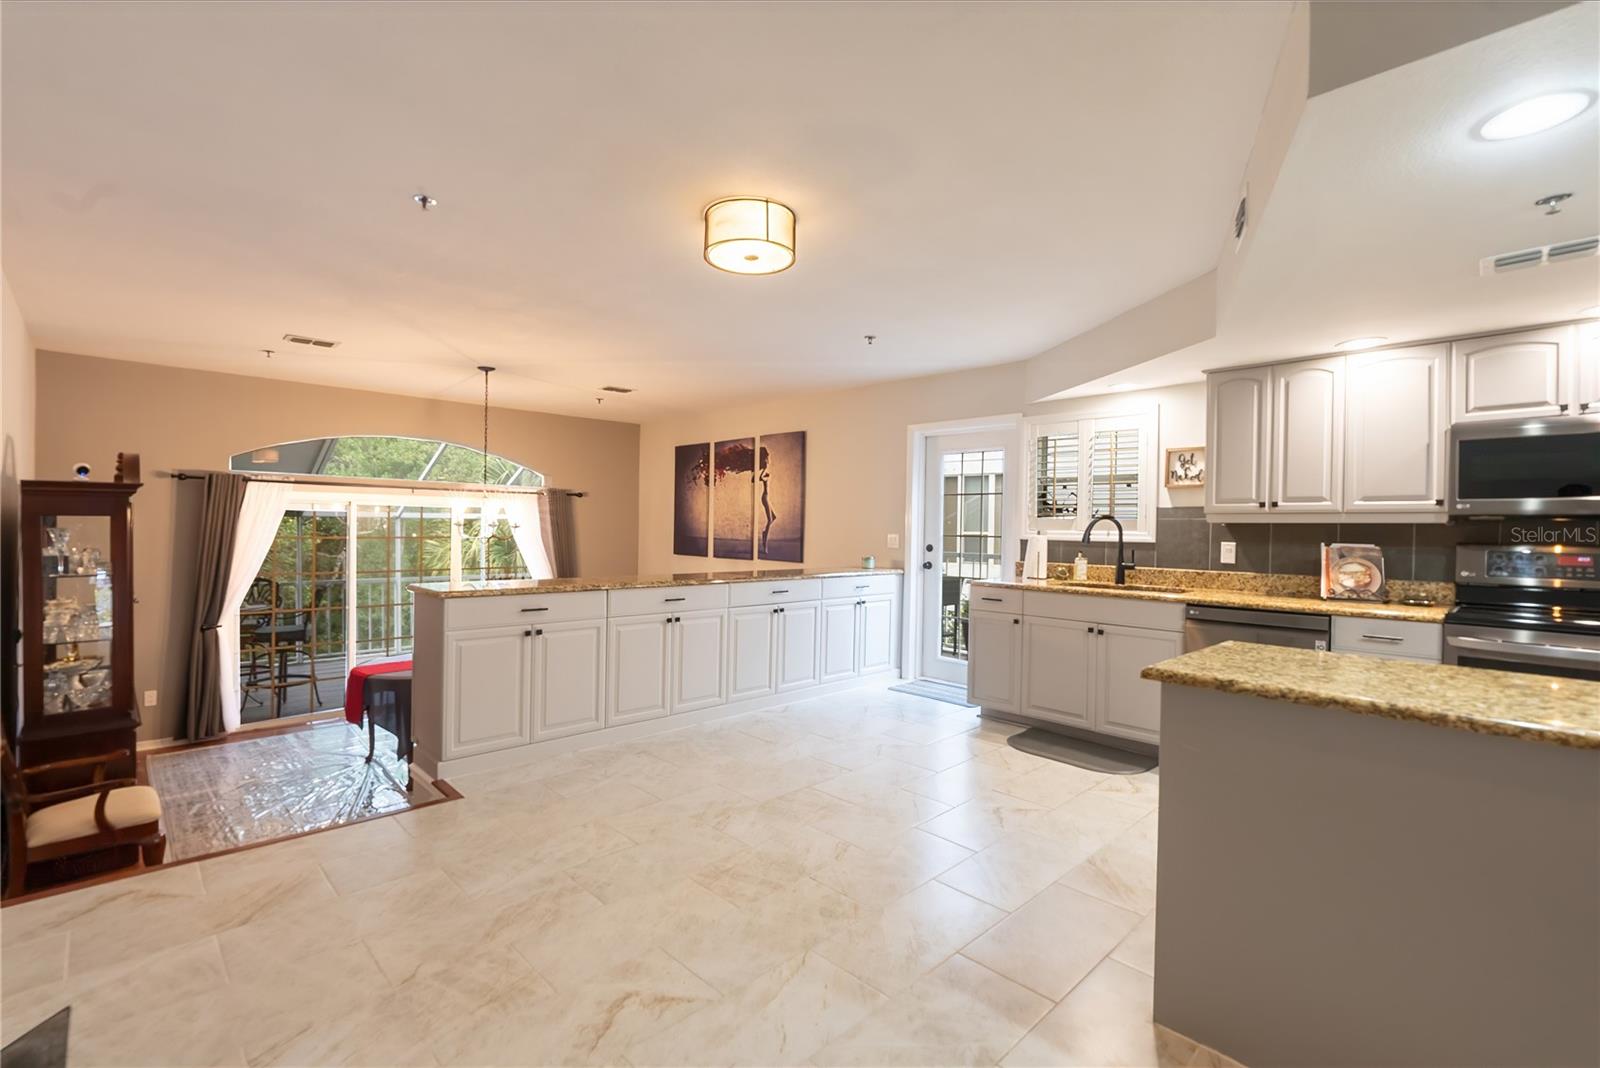 The large buffet cabinets and granite counter top separate the kitchen from the dining room.